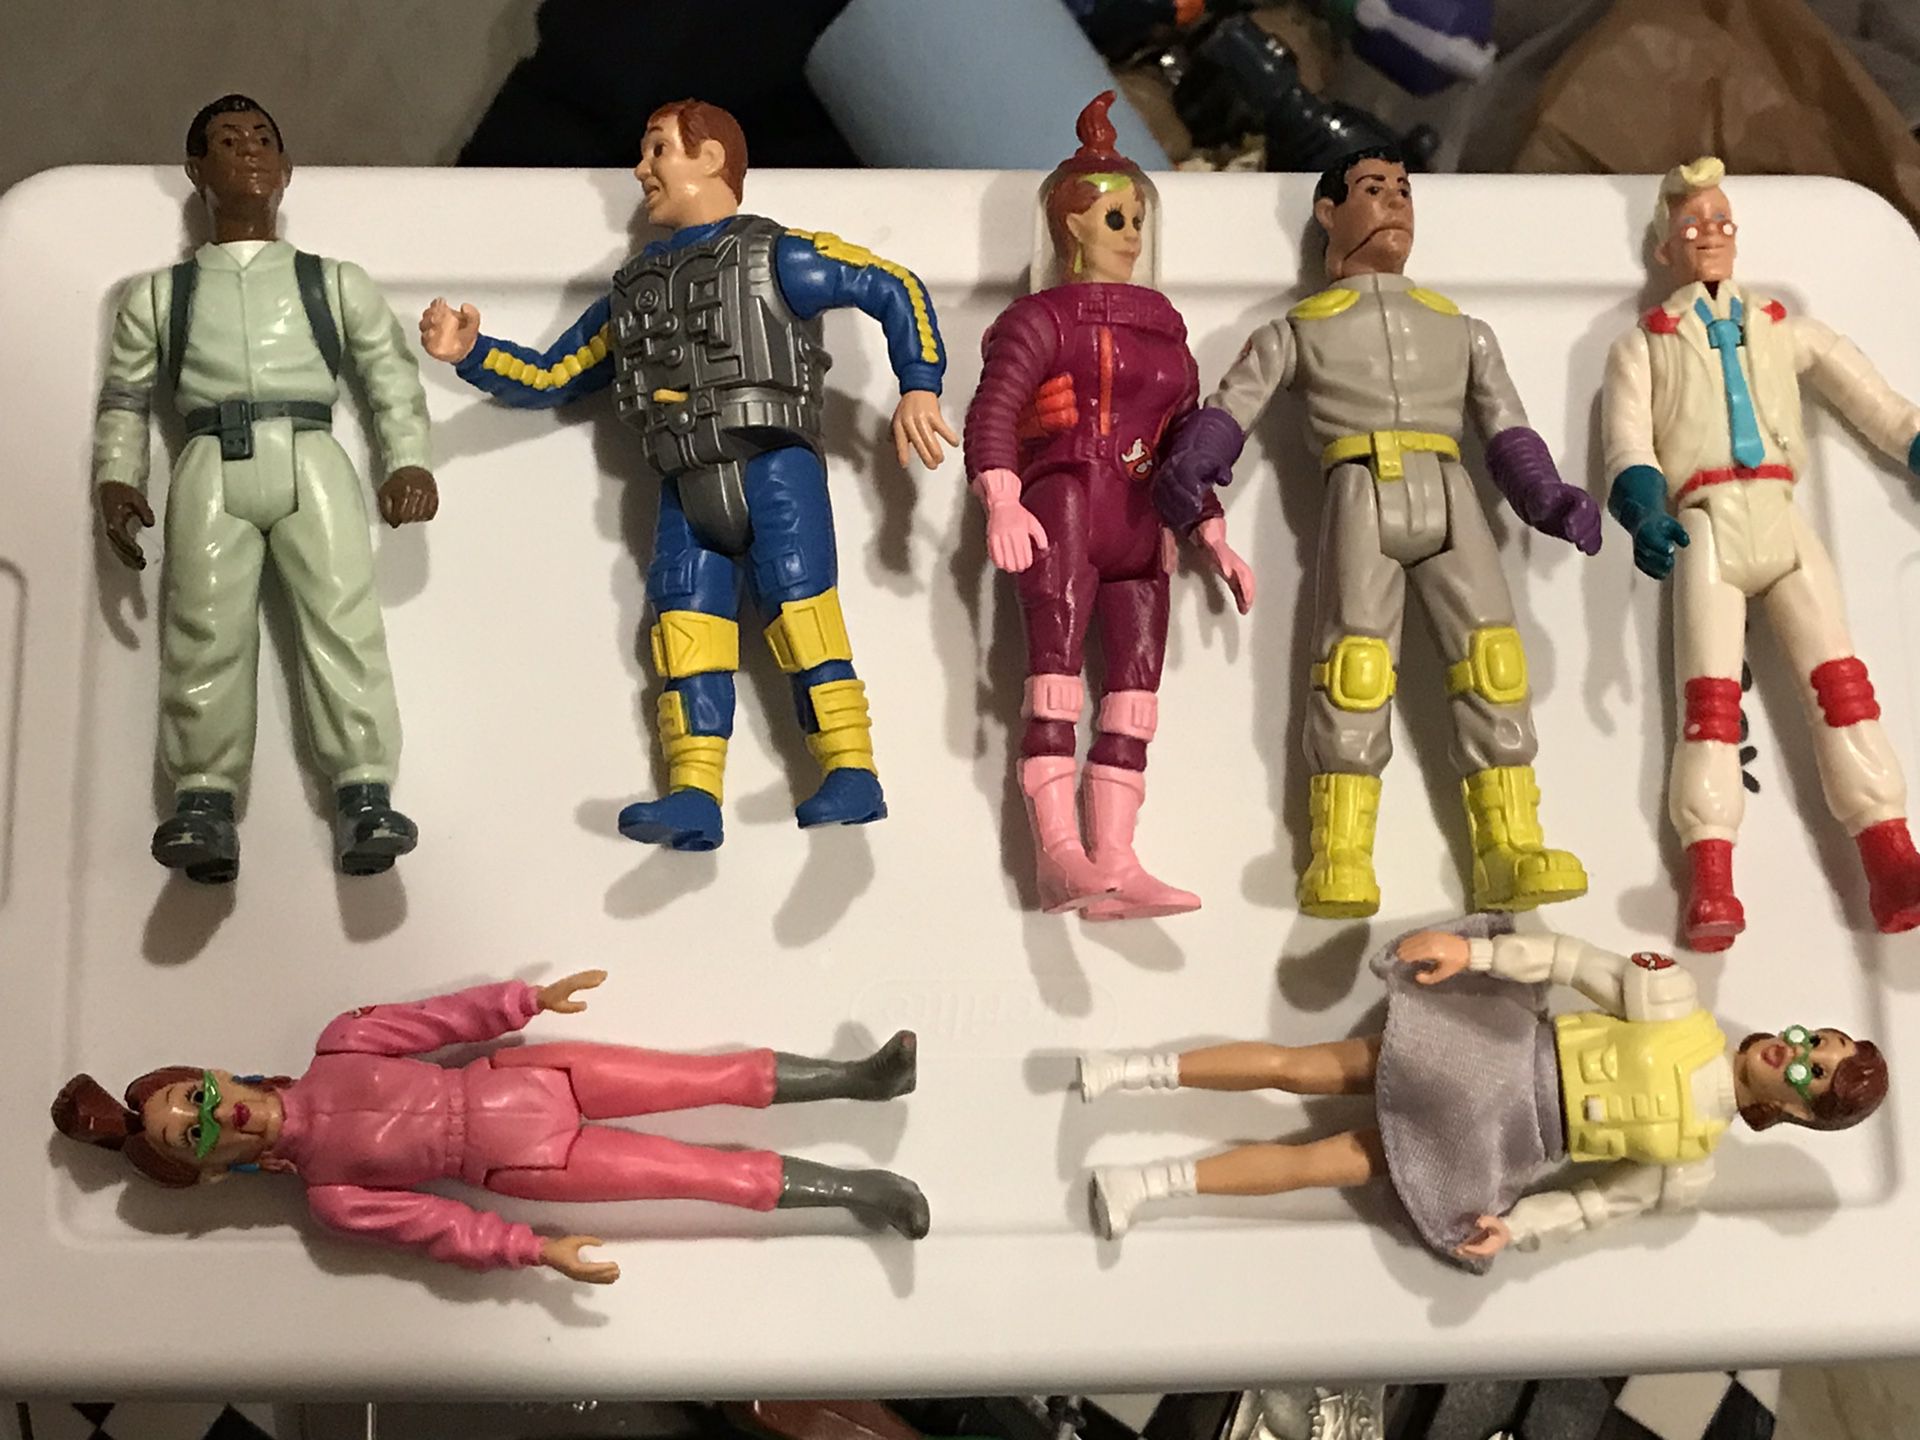 1980’s Ghostbusters action figures